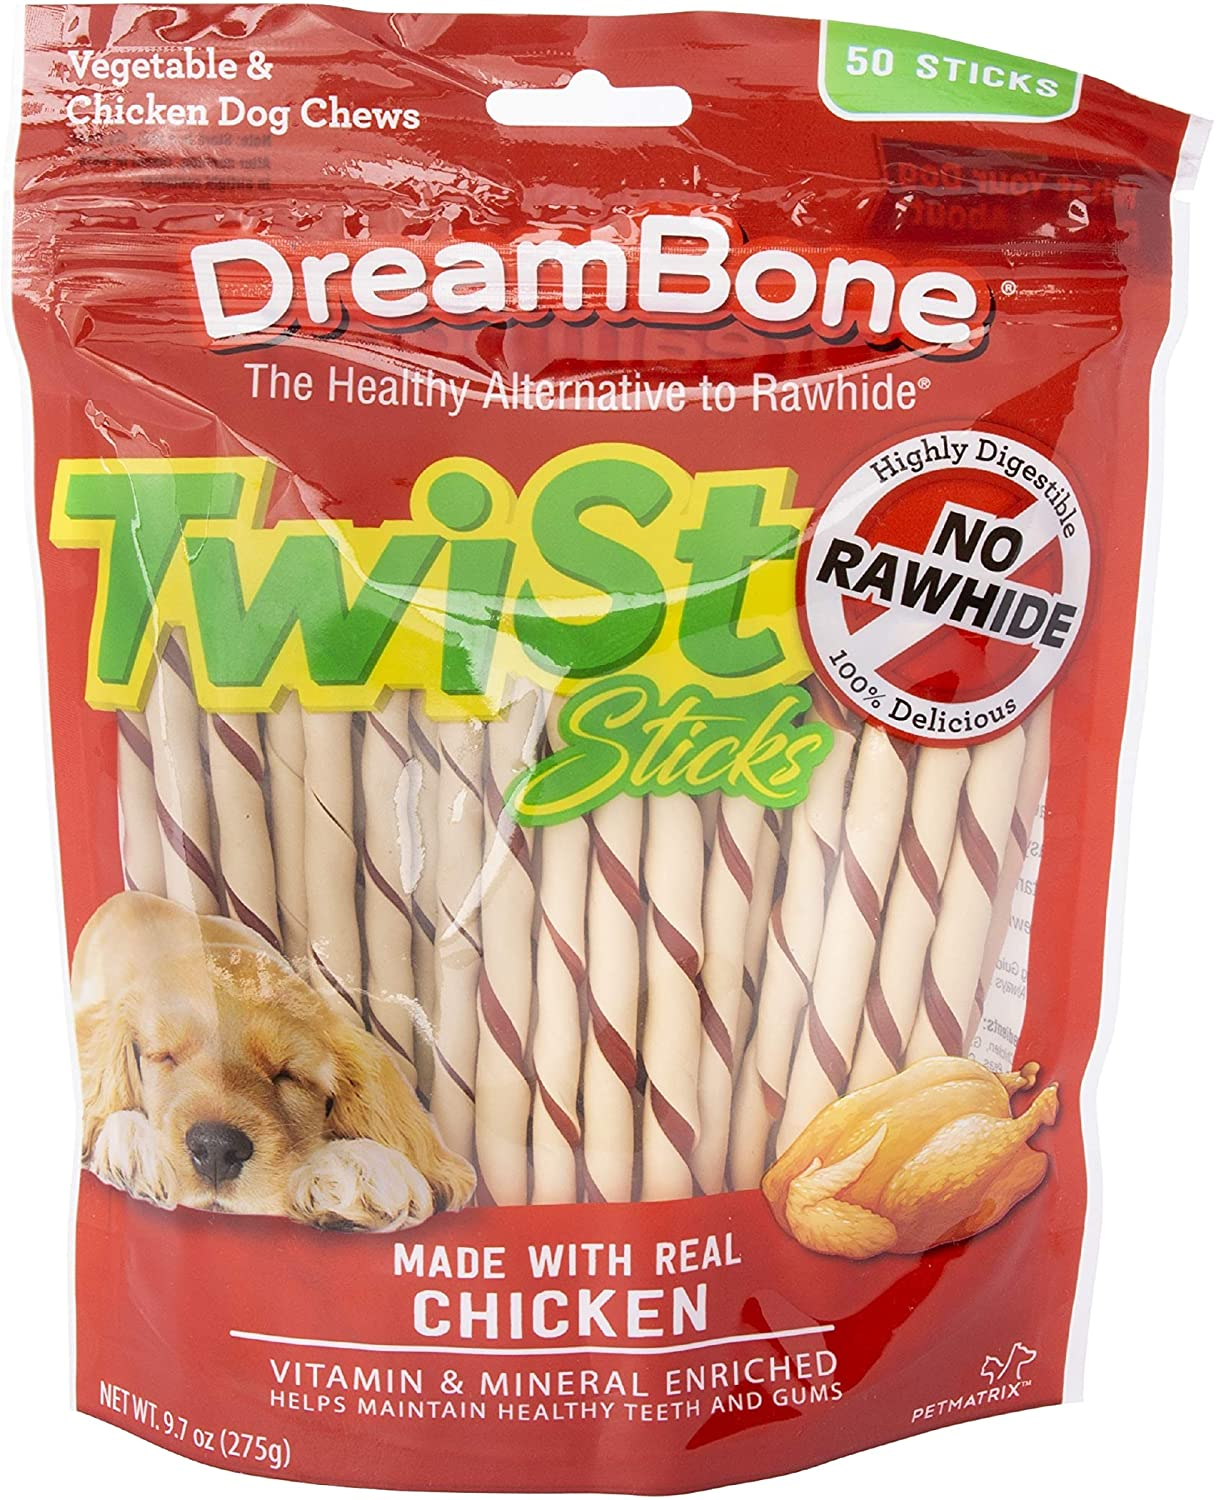 Dreambone Twist Sticks, Treat Your Dog to a Chew Made with Real Chicken and Vegetables